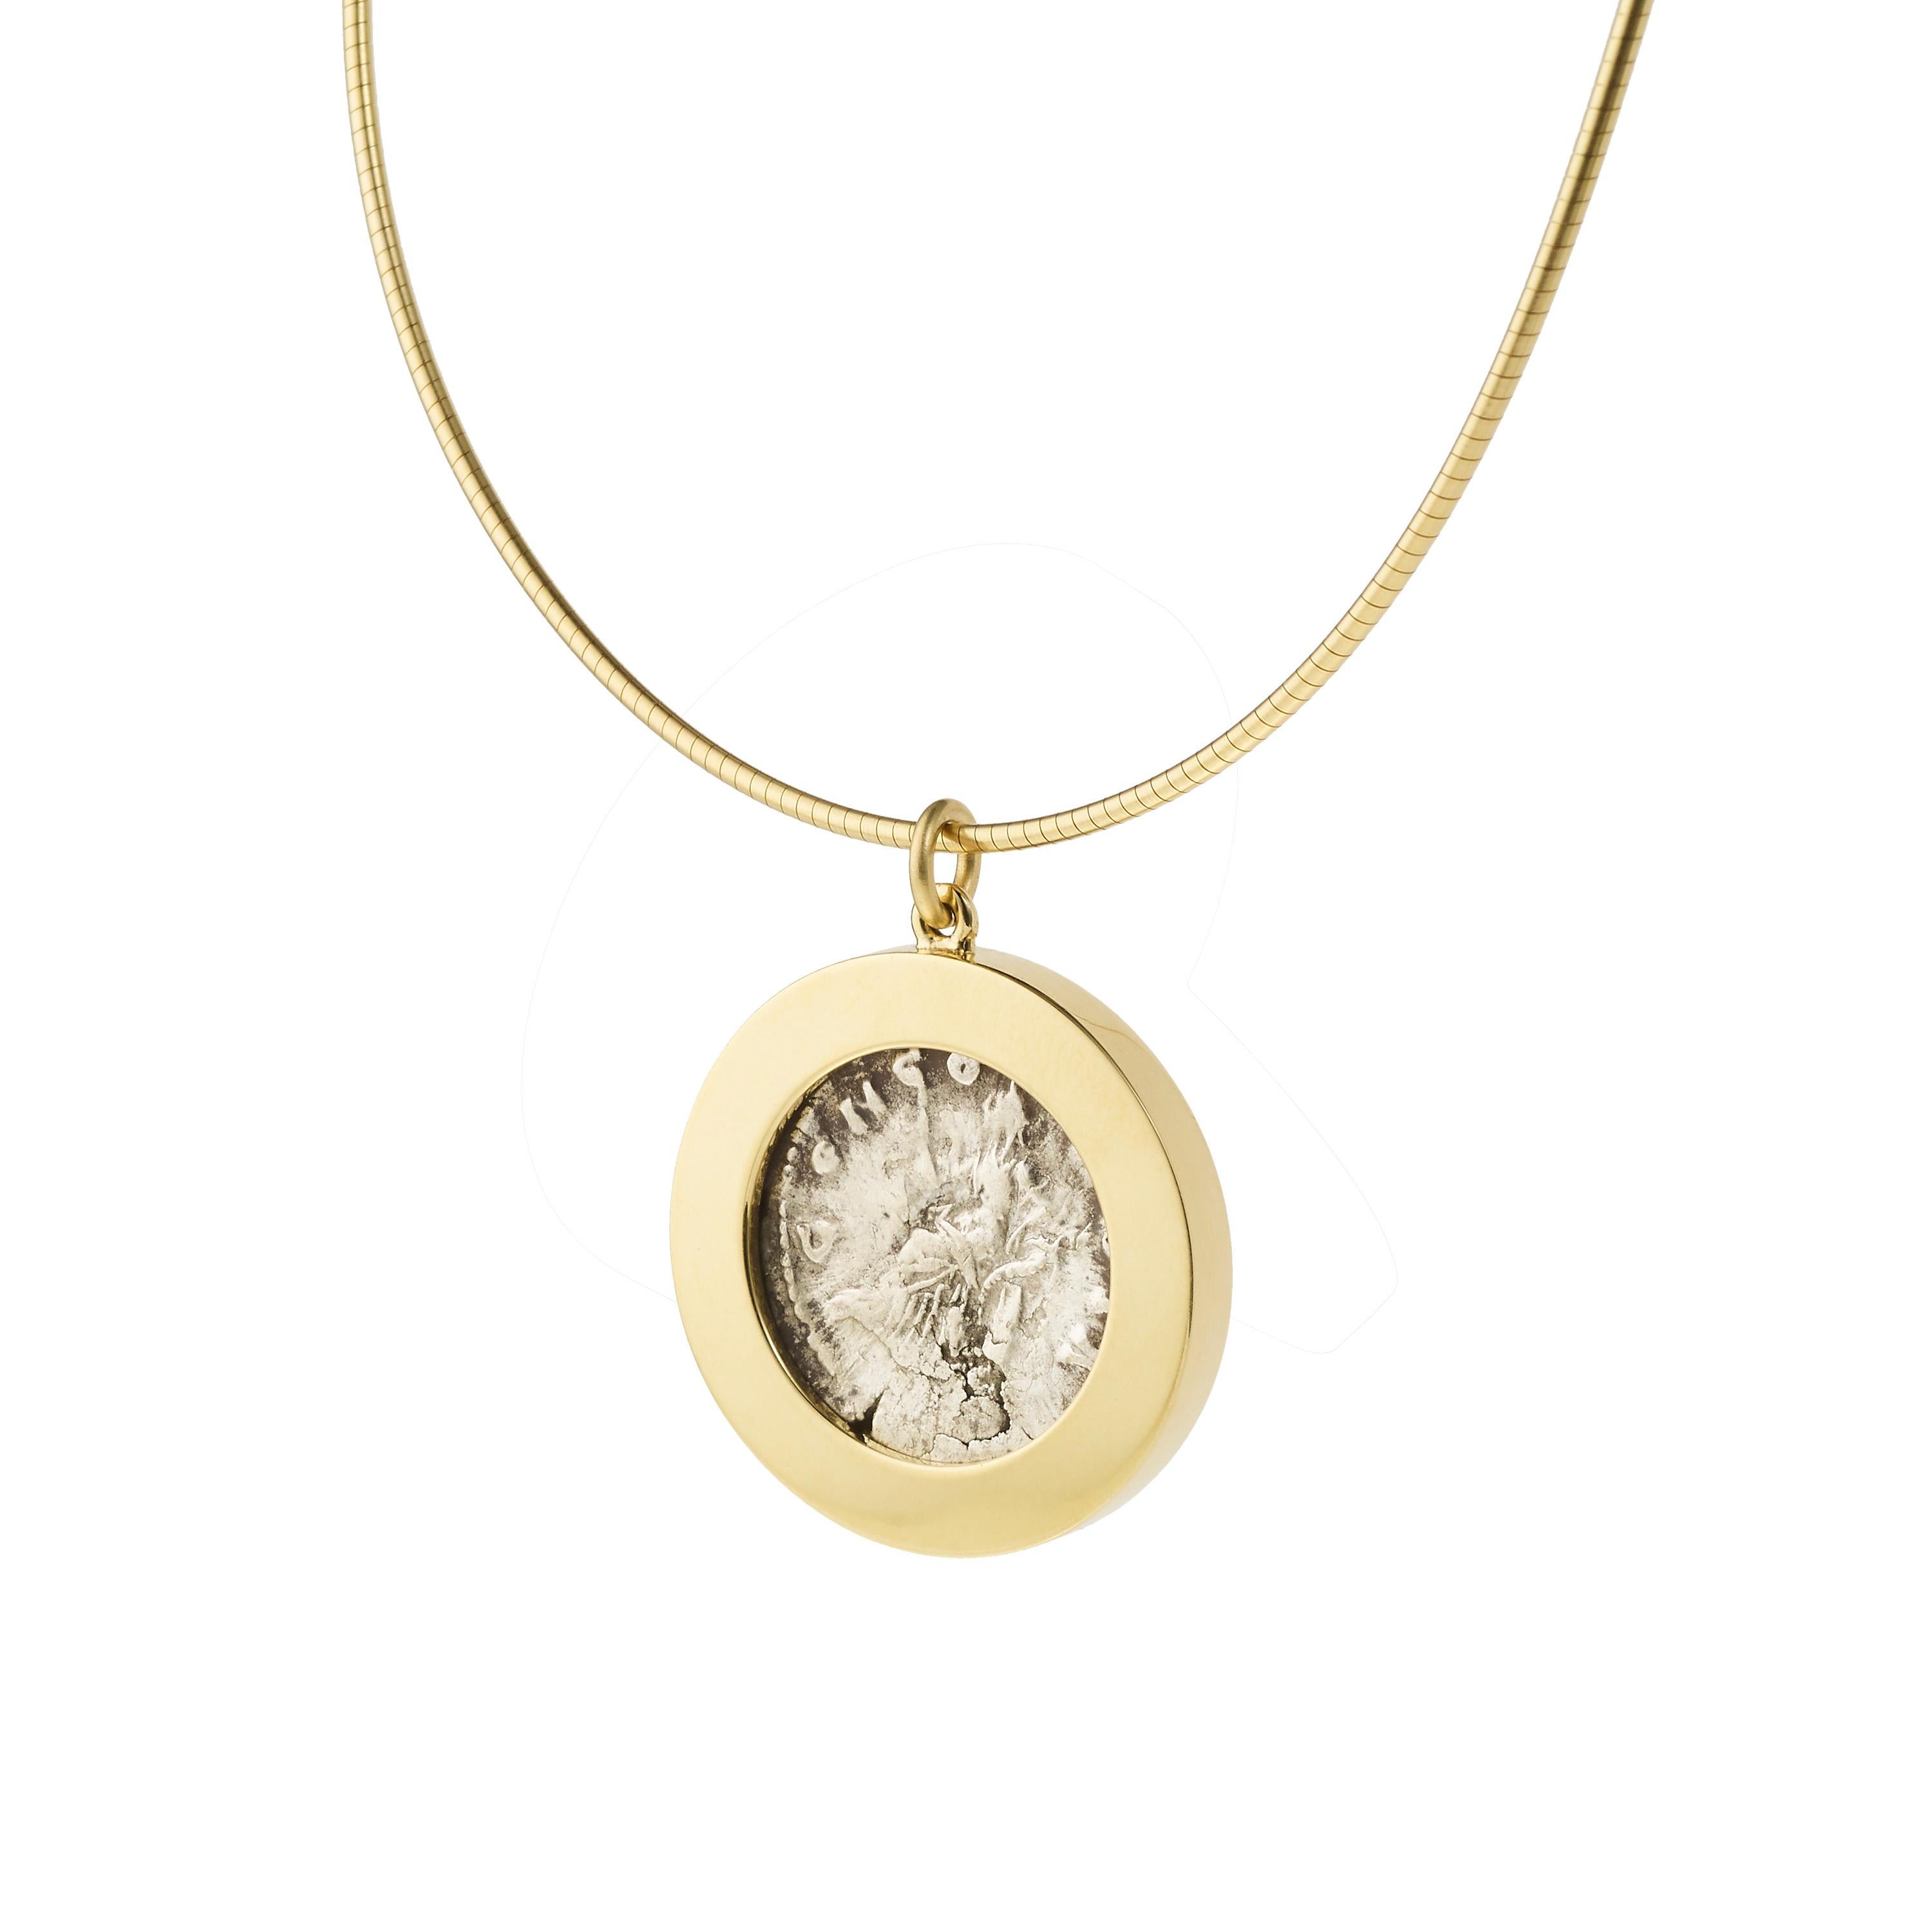 Victoria Strigini (b. 1991)

A contemporary 18k yellow gold pendant necklace featuring a Roman silver coin dating from 161-180 AD, depicting Empress Faustina, wife of Marcus Aurelius. The front of the coin shows a draped bust of Faustina with her